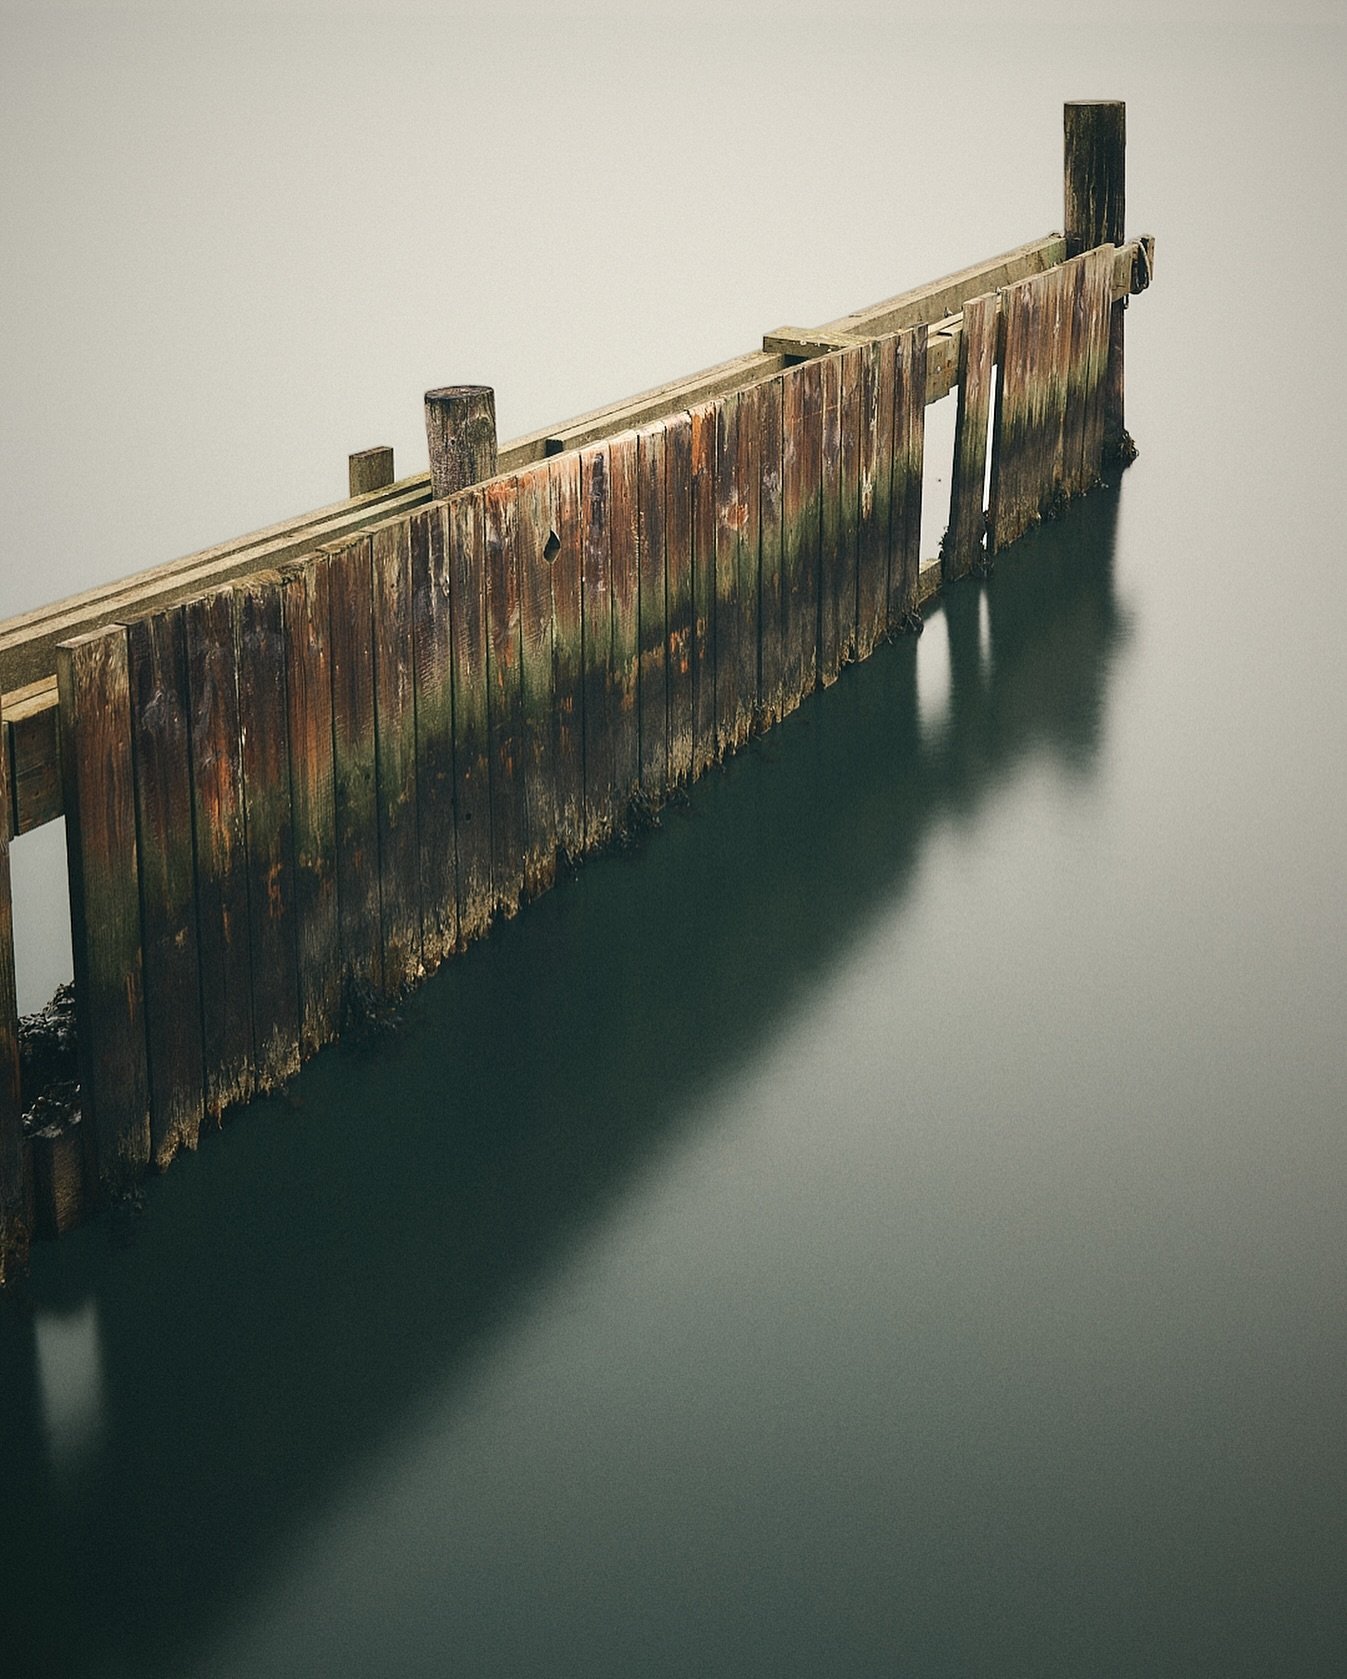 A corroded wall in the water at Bovallstrand
.
.
.
.
#longexposure #l&aring;ngexponering #bovallstrand #bohusl&auml;n #bohuslan #l&aring;ngexponeringstid #v&auml;stkusten #soten&auml;s #zenscape_photography #corrosion #rot